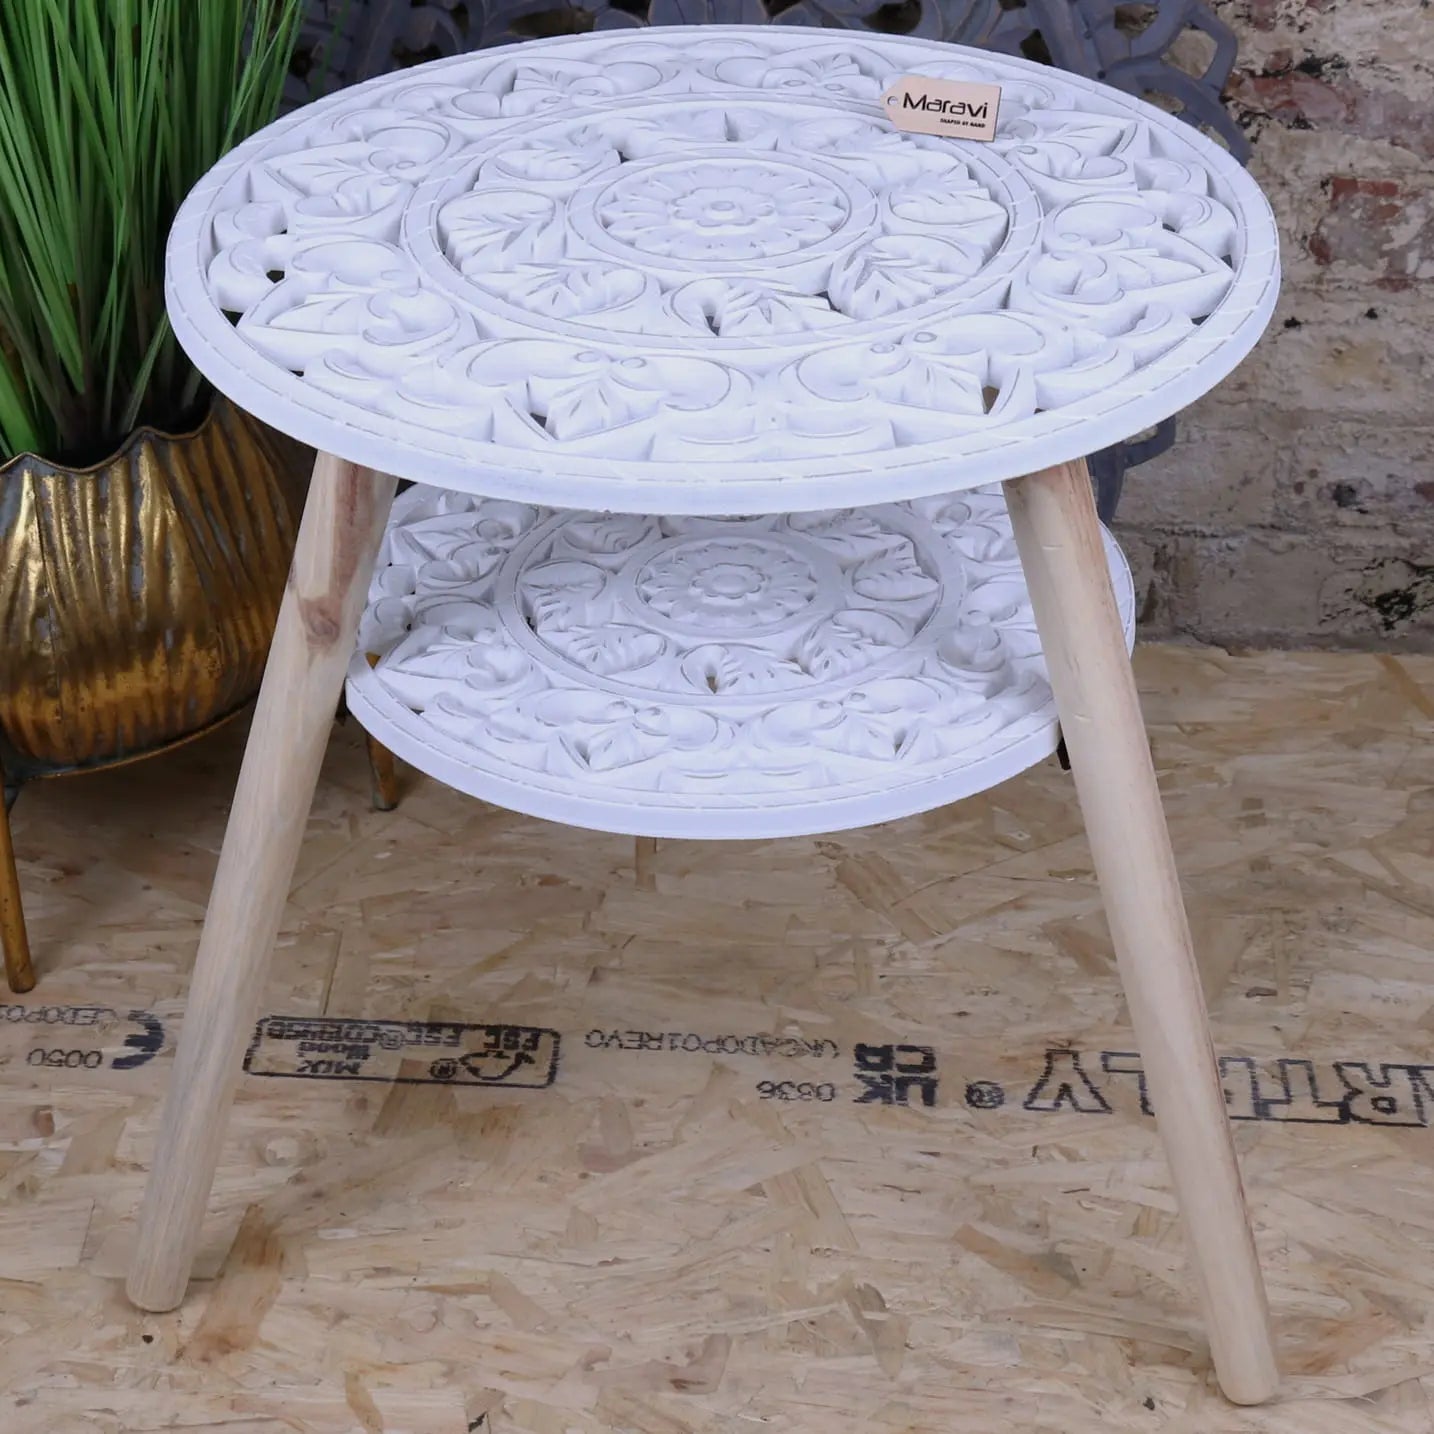 Elysian Bloom Two-Tier Shabby Chic Side Table - Main Image